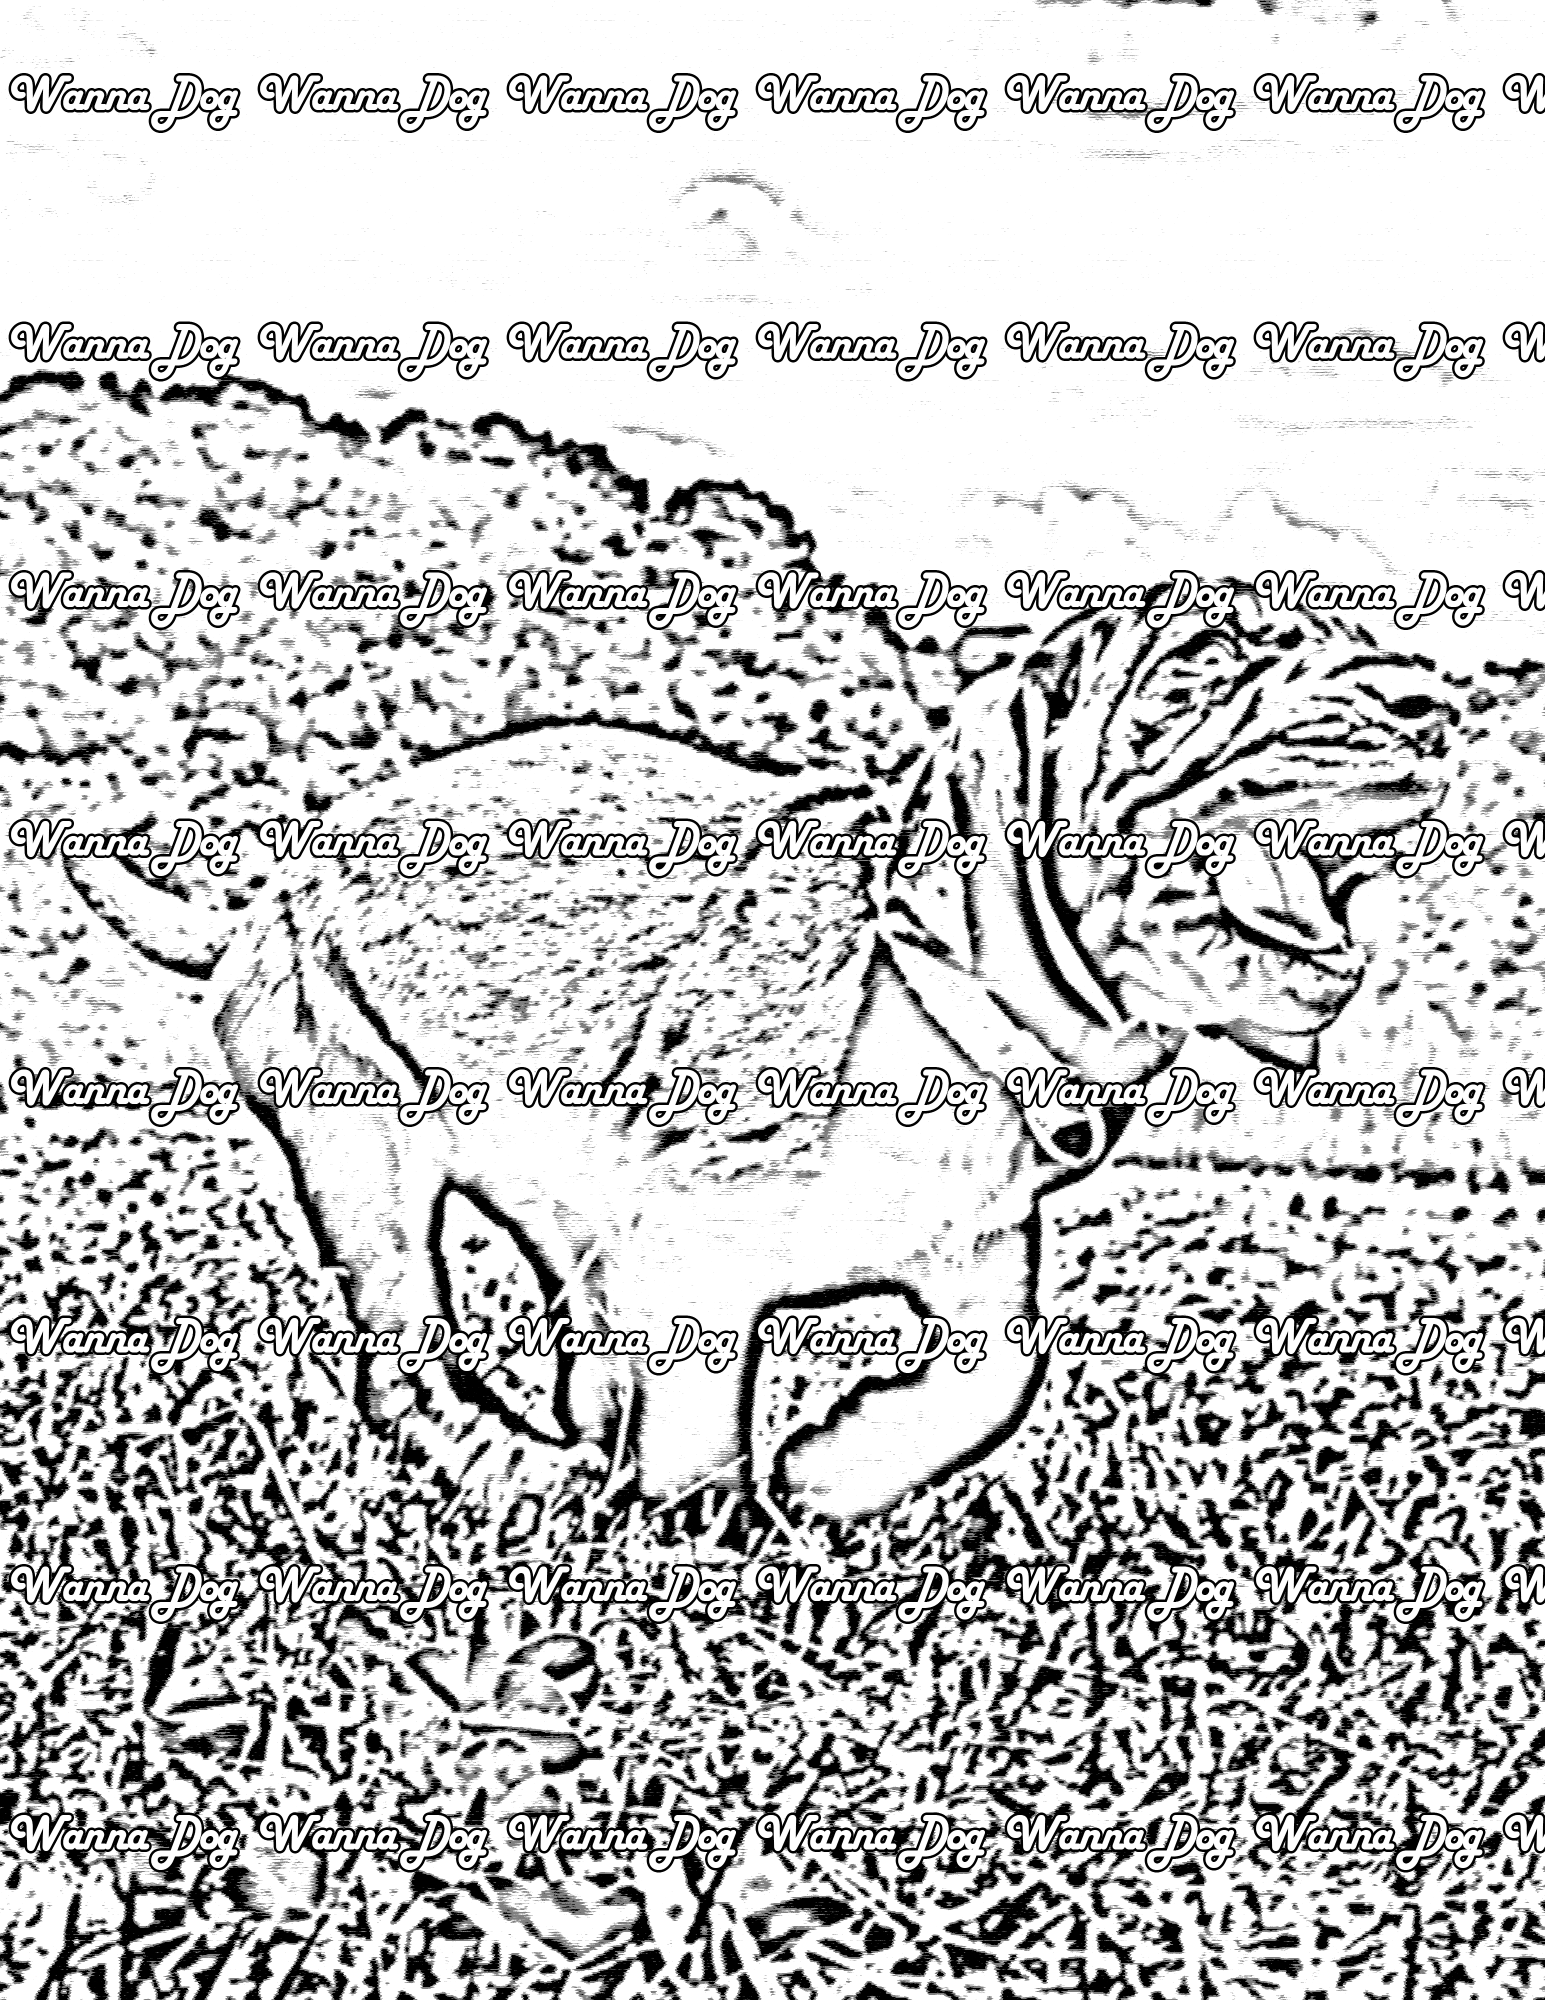 Bloodhound Coloring Page of a Bloodhound running in grass